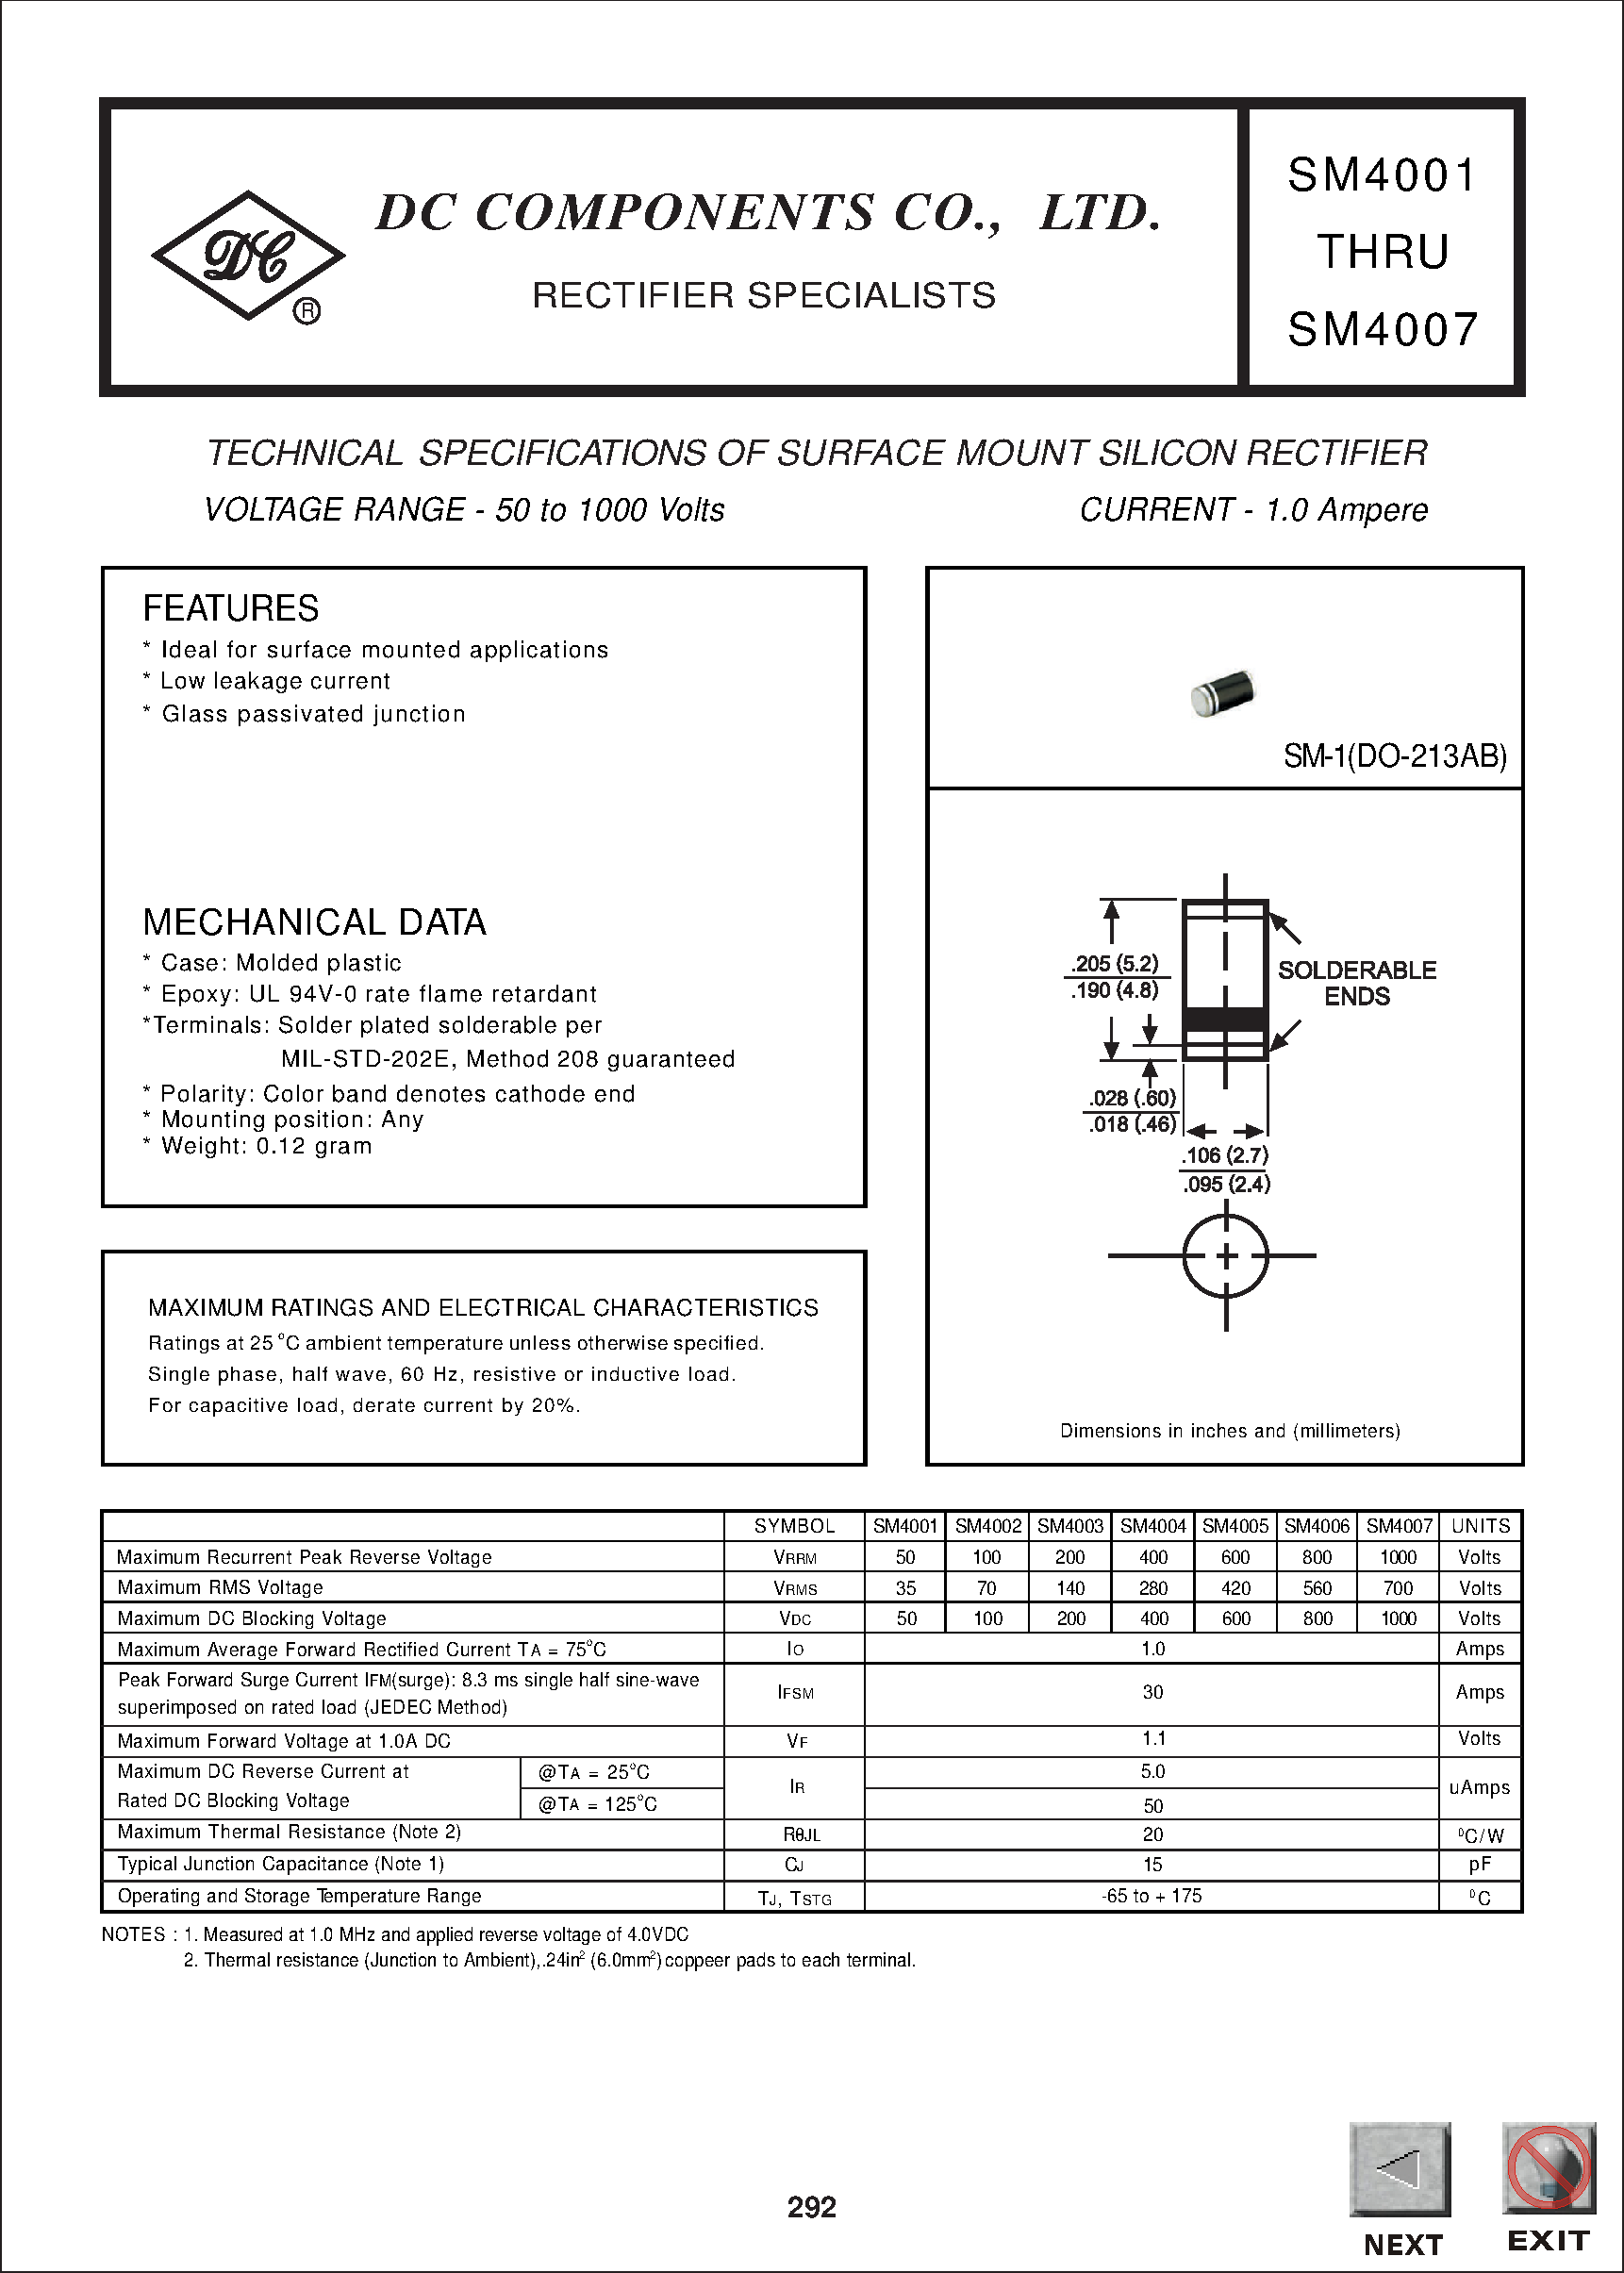 Даташит SM4002 - TECHNICAL SPECIFICATIONS OF SURFACE MOUNT SILICON RECTIFIER страница 1